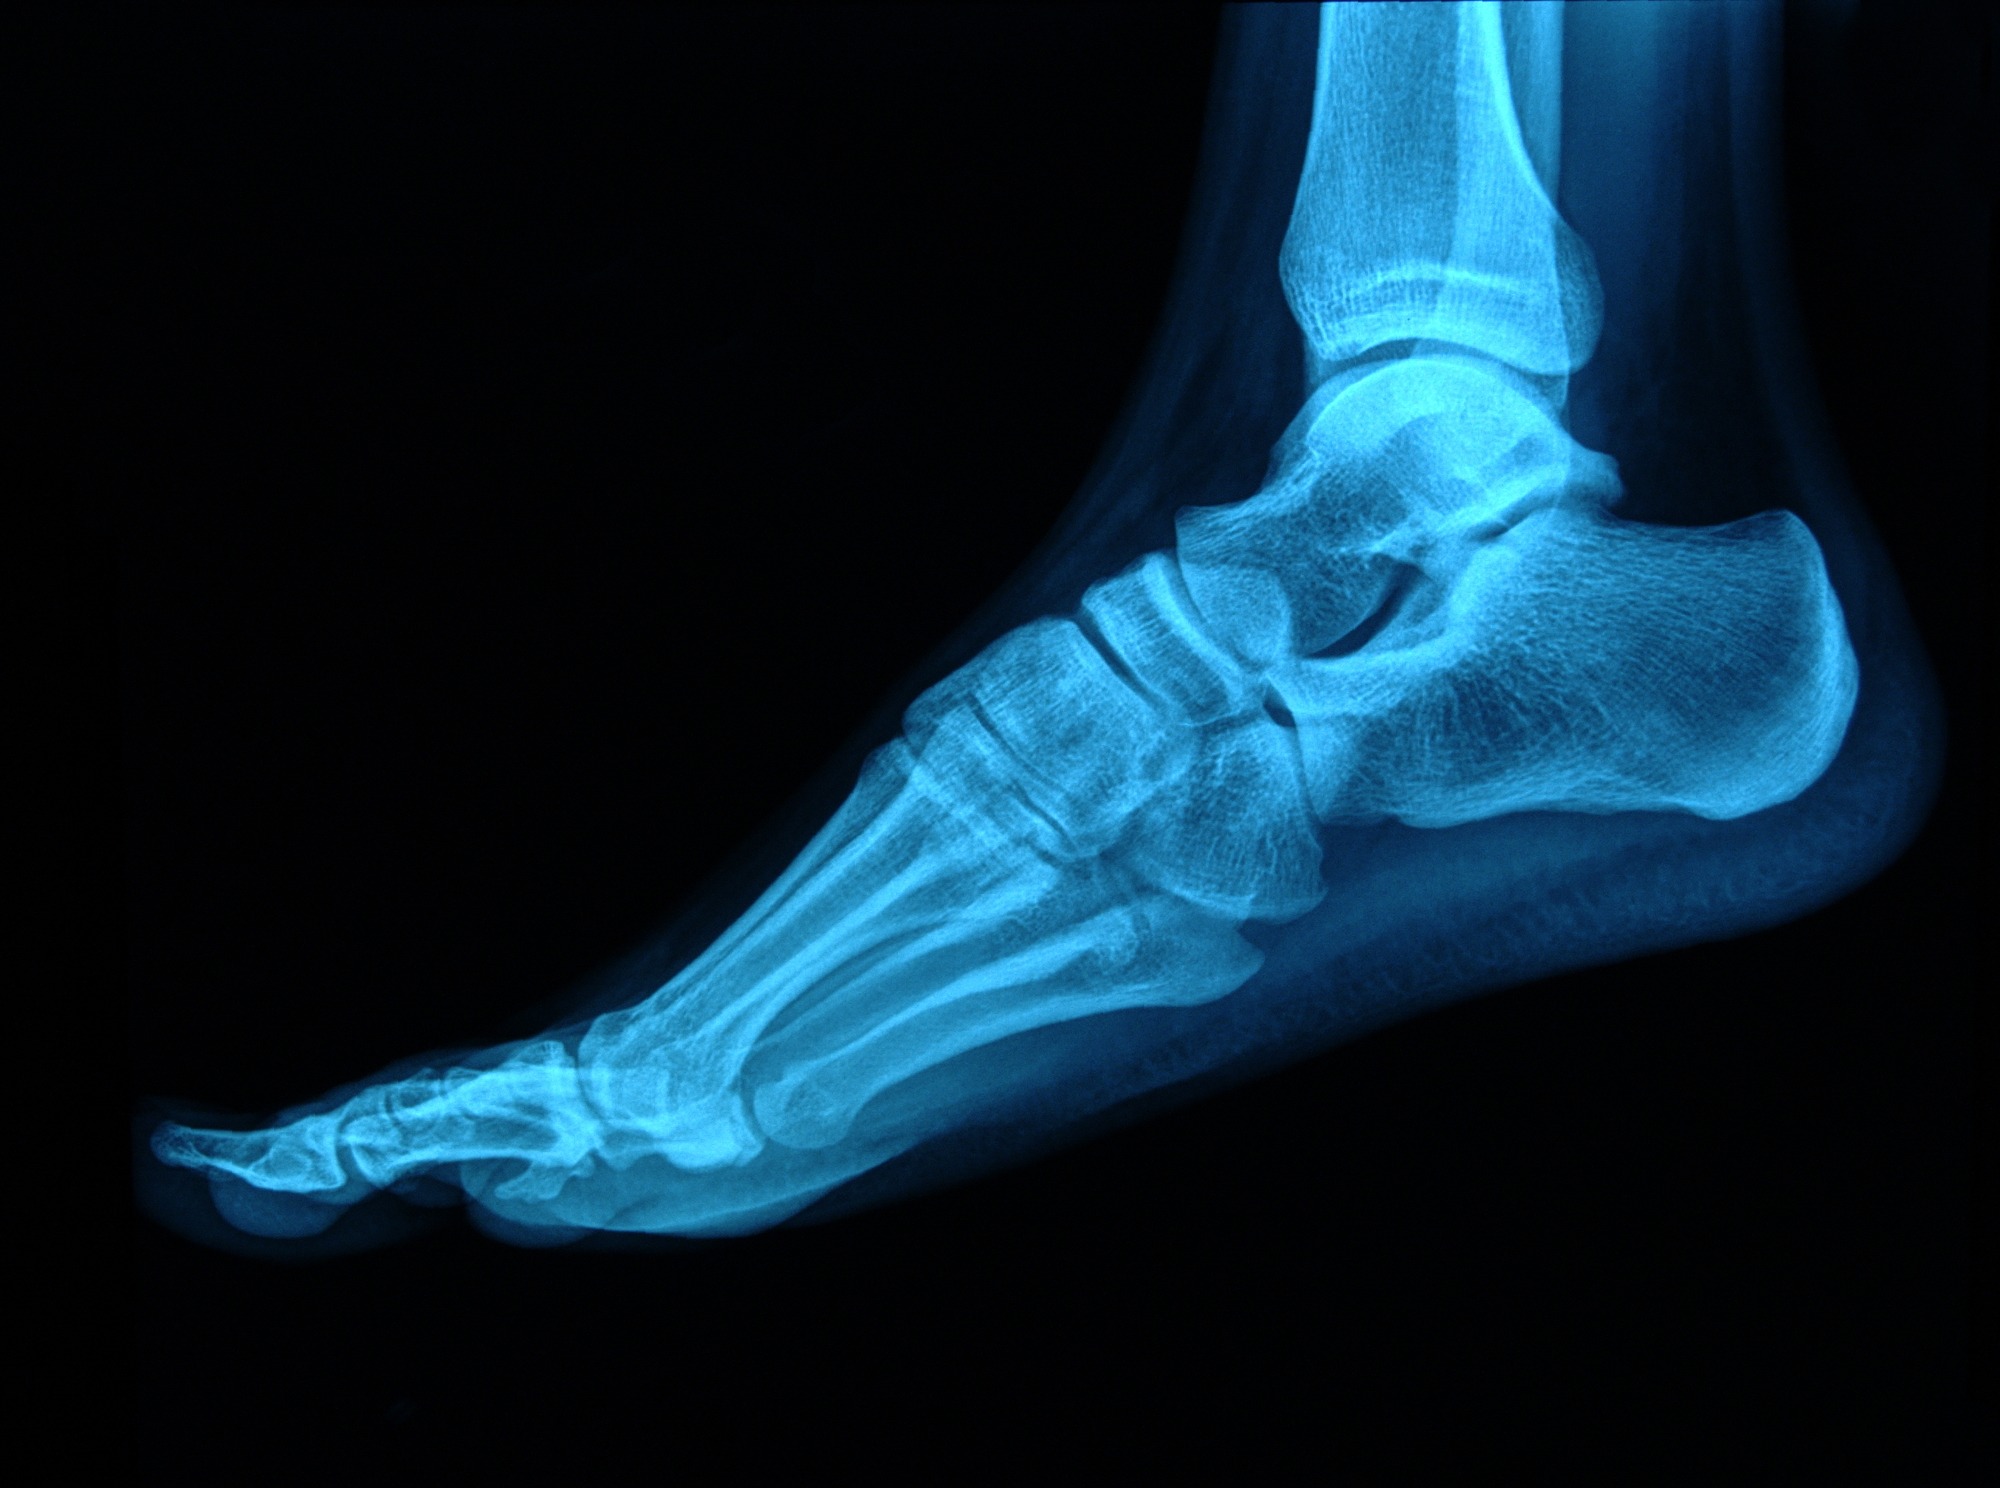 X-ray of a foot from the side